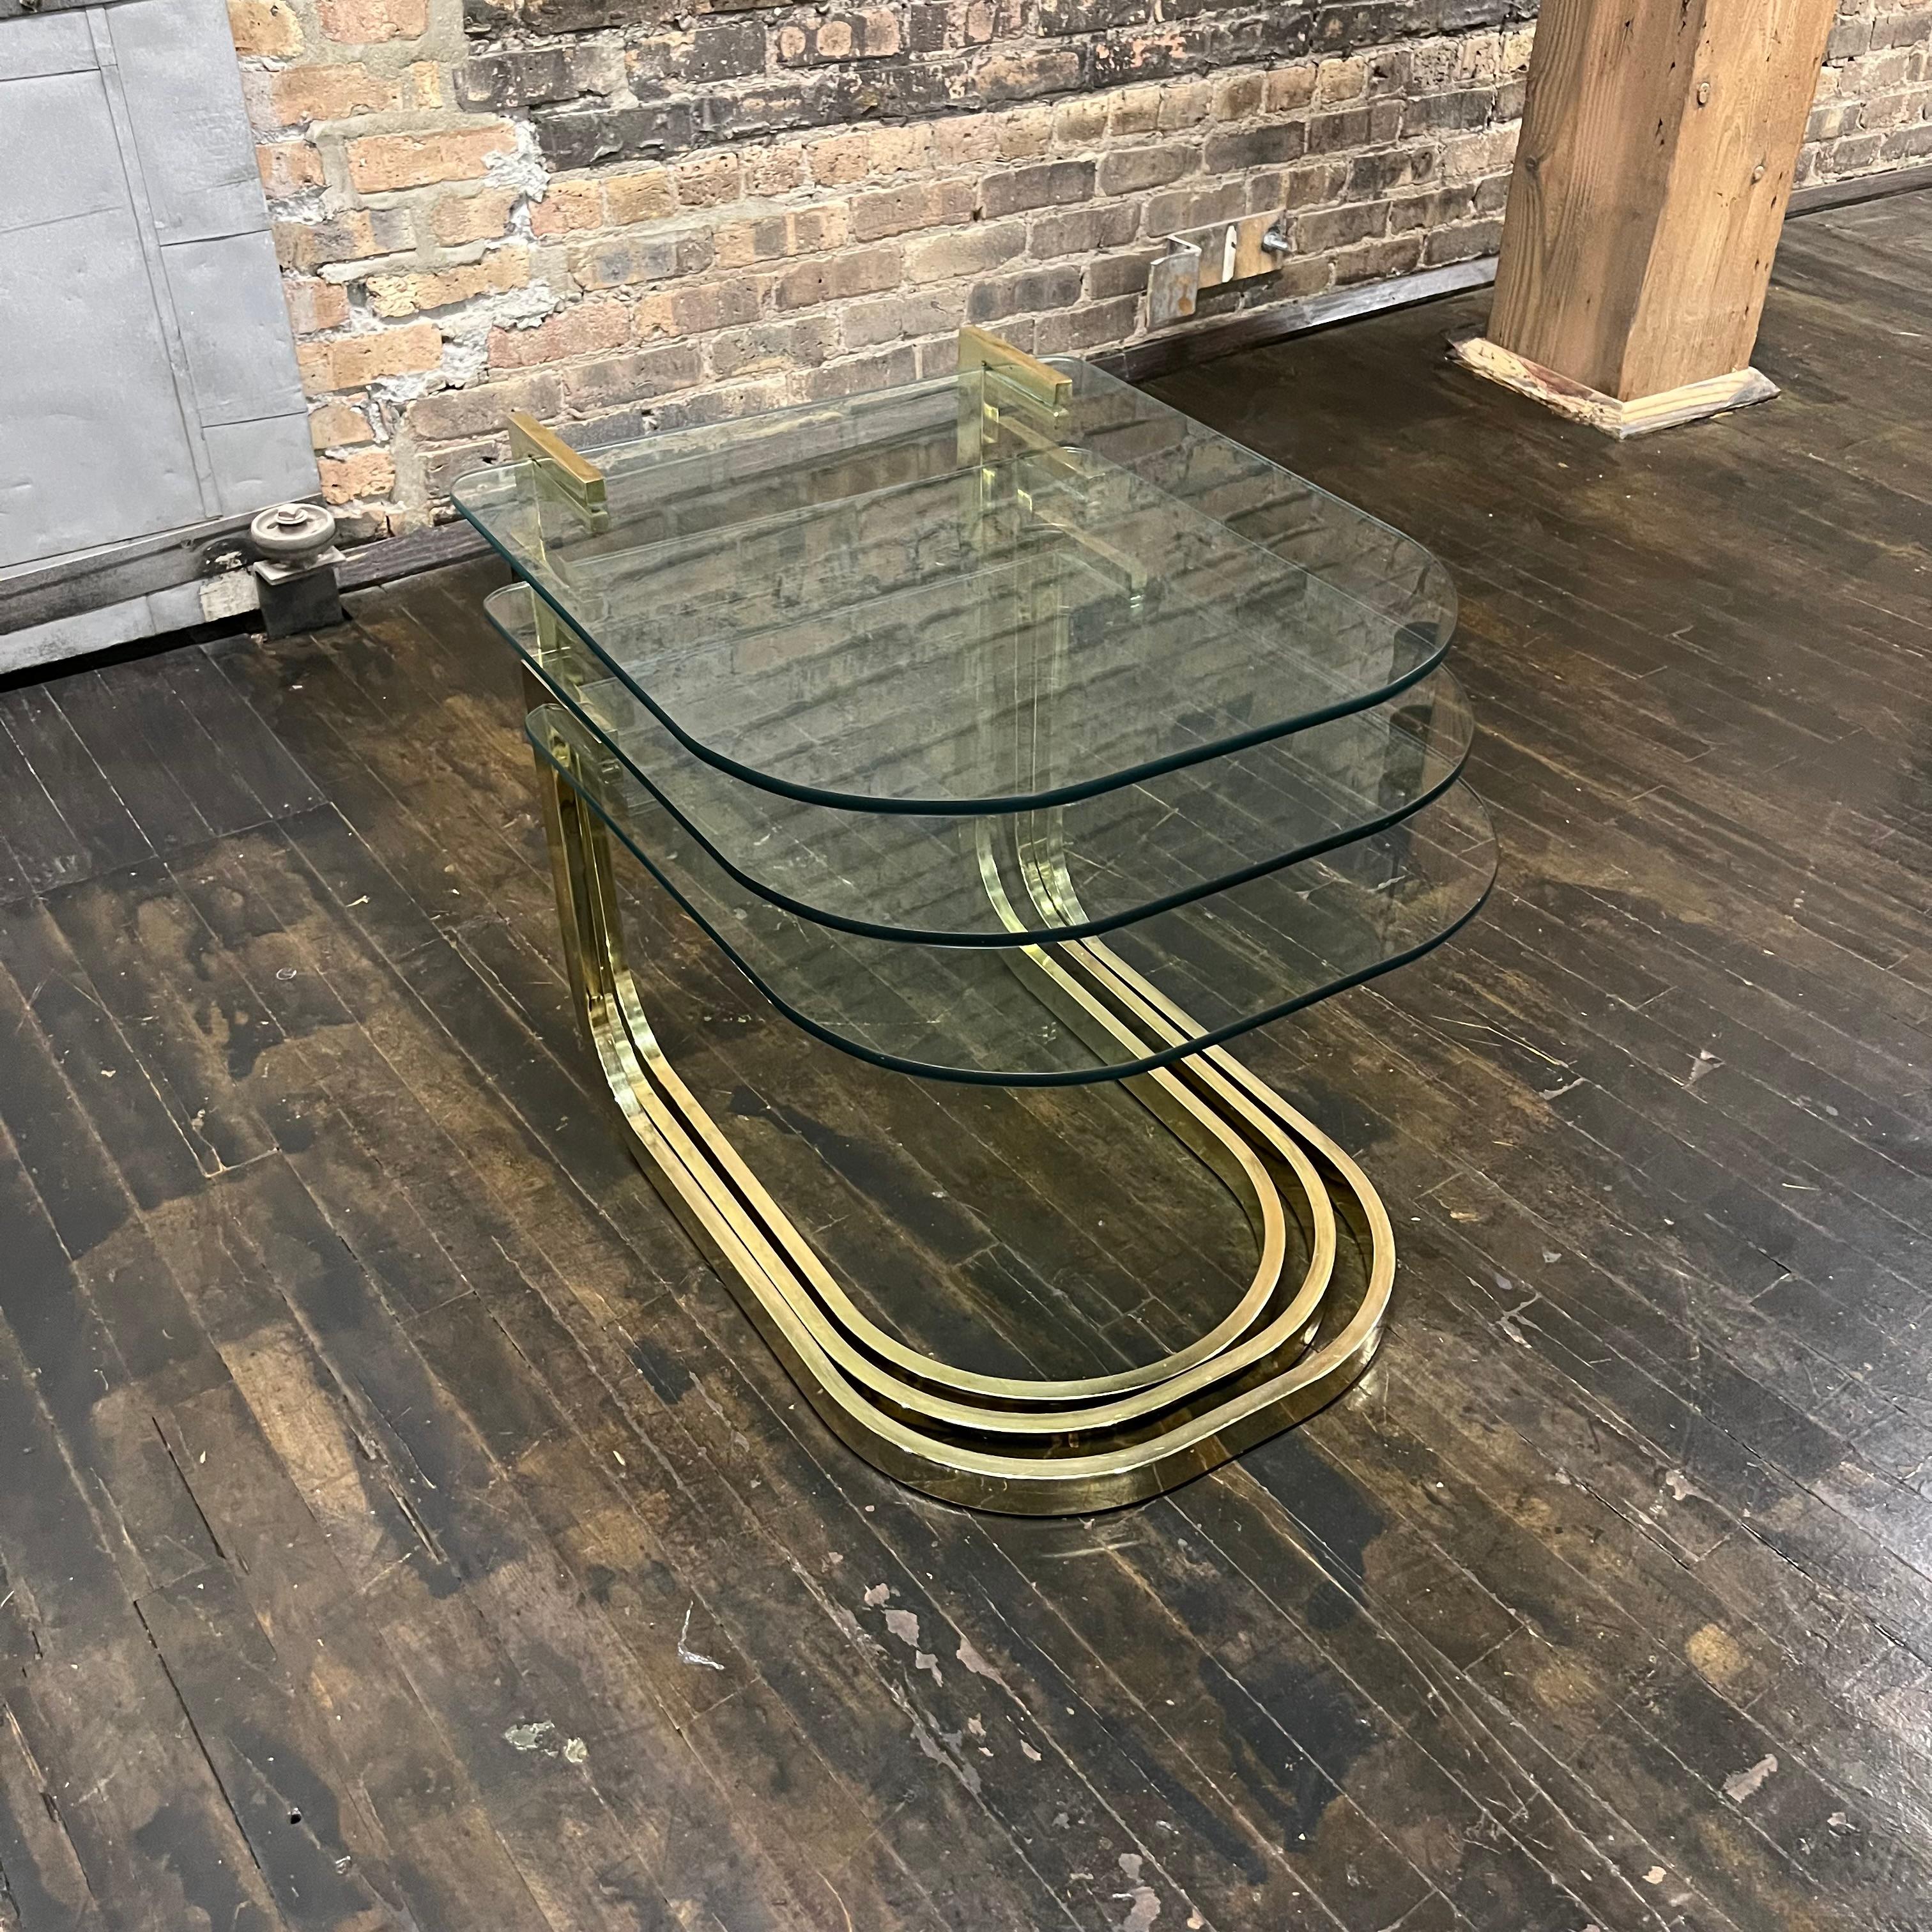 A set of three cantilevered glass and brass nesting tables attributed to Milo Baughman for DIA (Design Institute of America).

Milo Baughman (1923-2003) was a pioneer in modern design and one of the leading modern furniture designers of the second